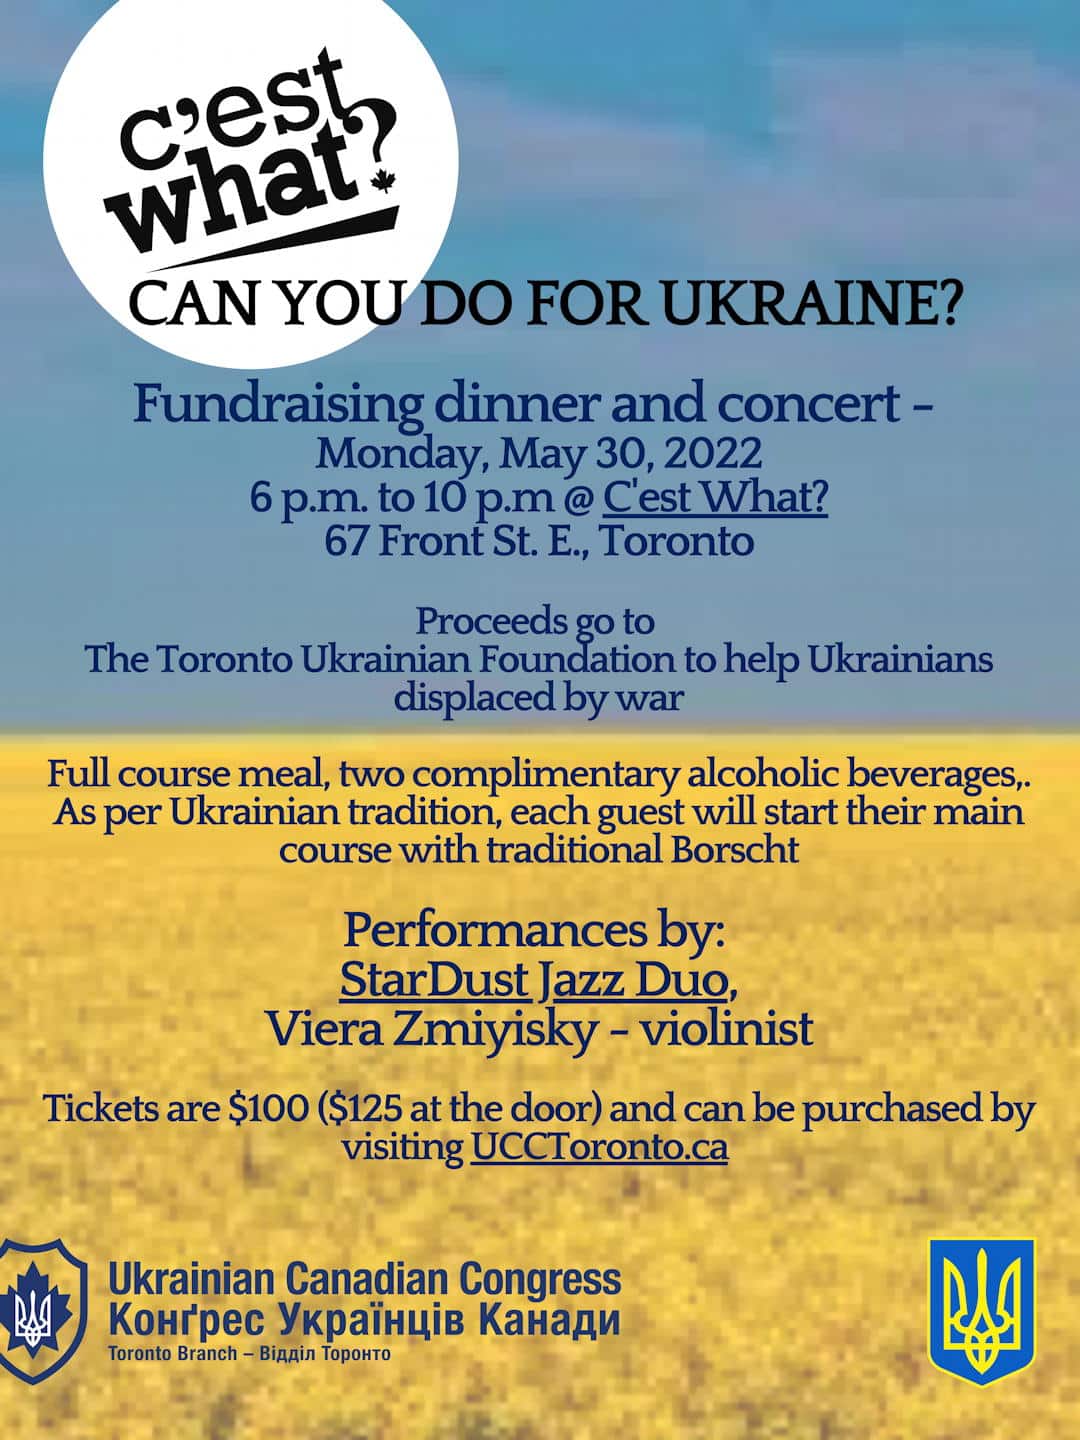 Poster for Ukraine benefit on May 30, 2022